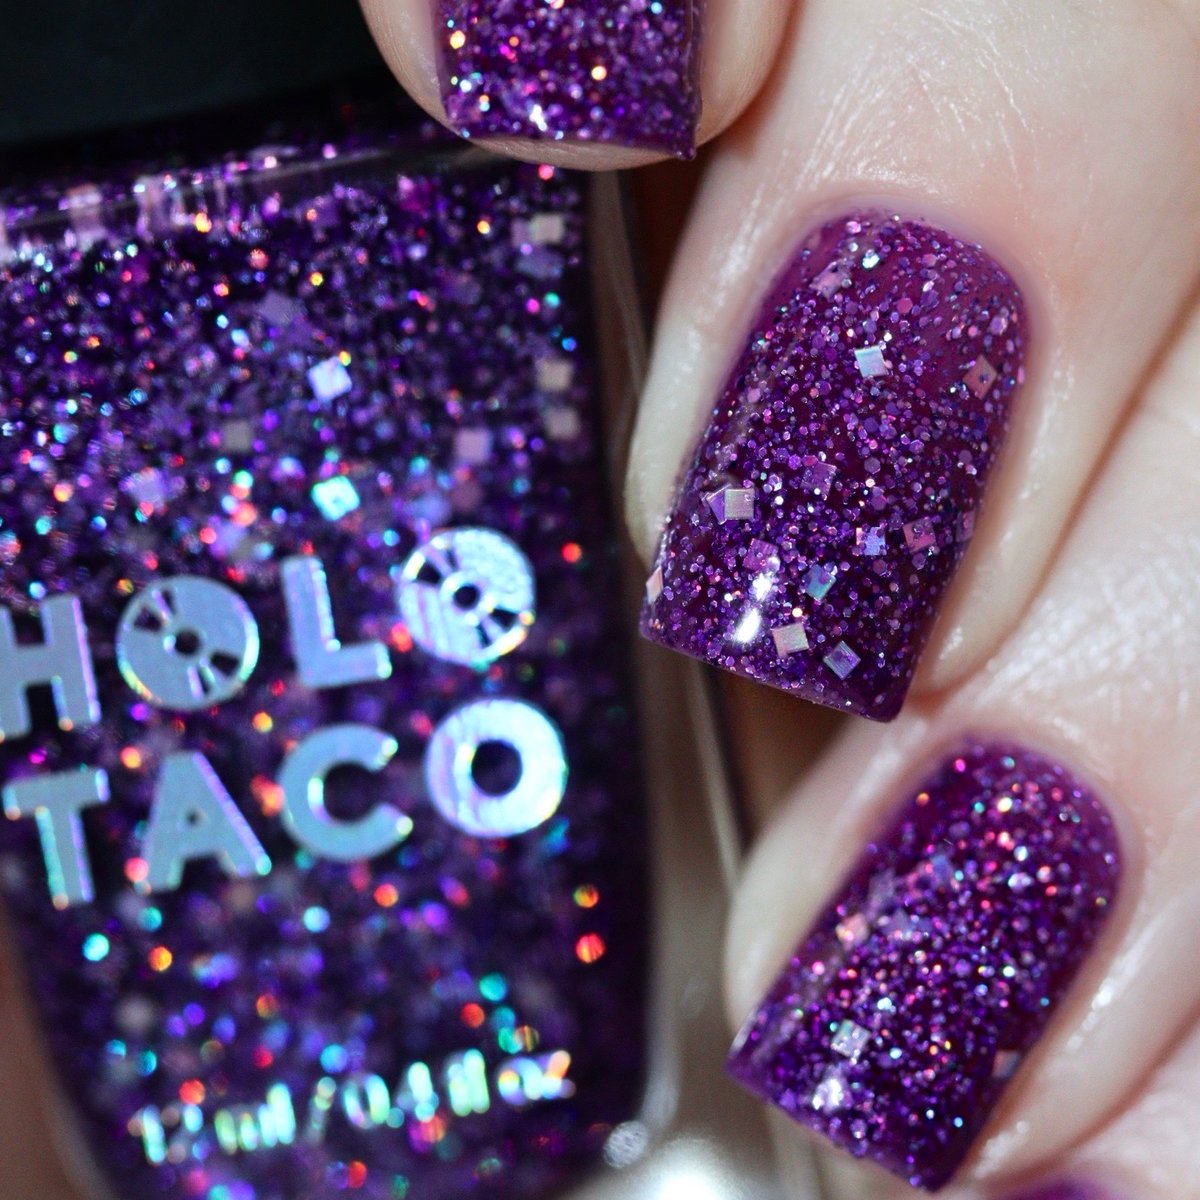 The audacity we had to release this Inside Job without consulting with Holo Royalty 🤫 snag this ✨limited edition✨gem before it returns to the safe 💎🔒
1️⃣ publicationsandpolish
2️⃣ aanchysnails
3️⃣ dangerouslypolished
4️⃣ @anikibee
#holotaco #shimmeringsecrets #insidejob 💿🌮